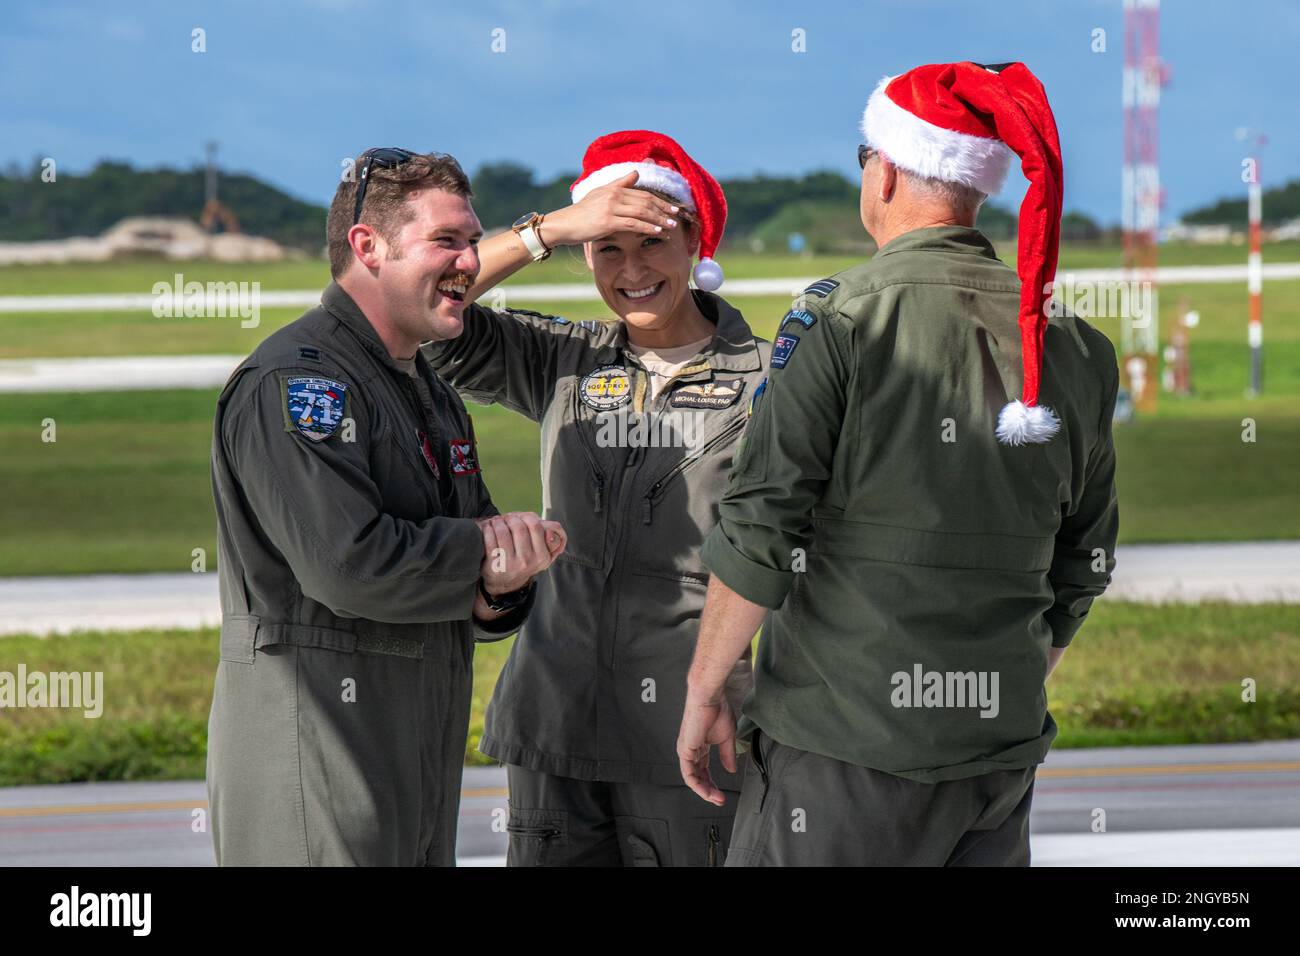 (Left to right) U.S. Air Force Capt. Andrew Zaldivar, 36th Expeditionary Airlift Squadron, greets Royal New Zealand Air Force Flight Lieutenant Michal-Louise Paget and Flight Lieutenant Campbell Wilson at Andersen Air Force Base, Guam, Dec. 1, 2022, during Operation Christmas Drop 2022. Operation Christmas Drop is the longest-running Department of Defense humanitarian mission that delivers critical aid to island communities throughout the western Pacific while also providing an opportunity for aircrew to hone important skills needed for future operations. Stock Photo